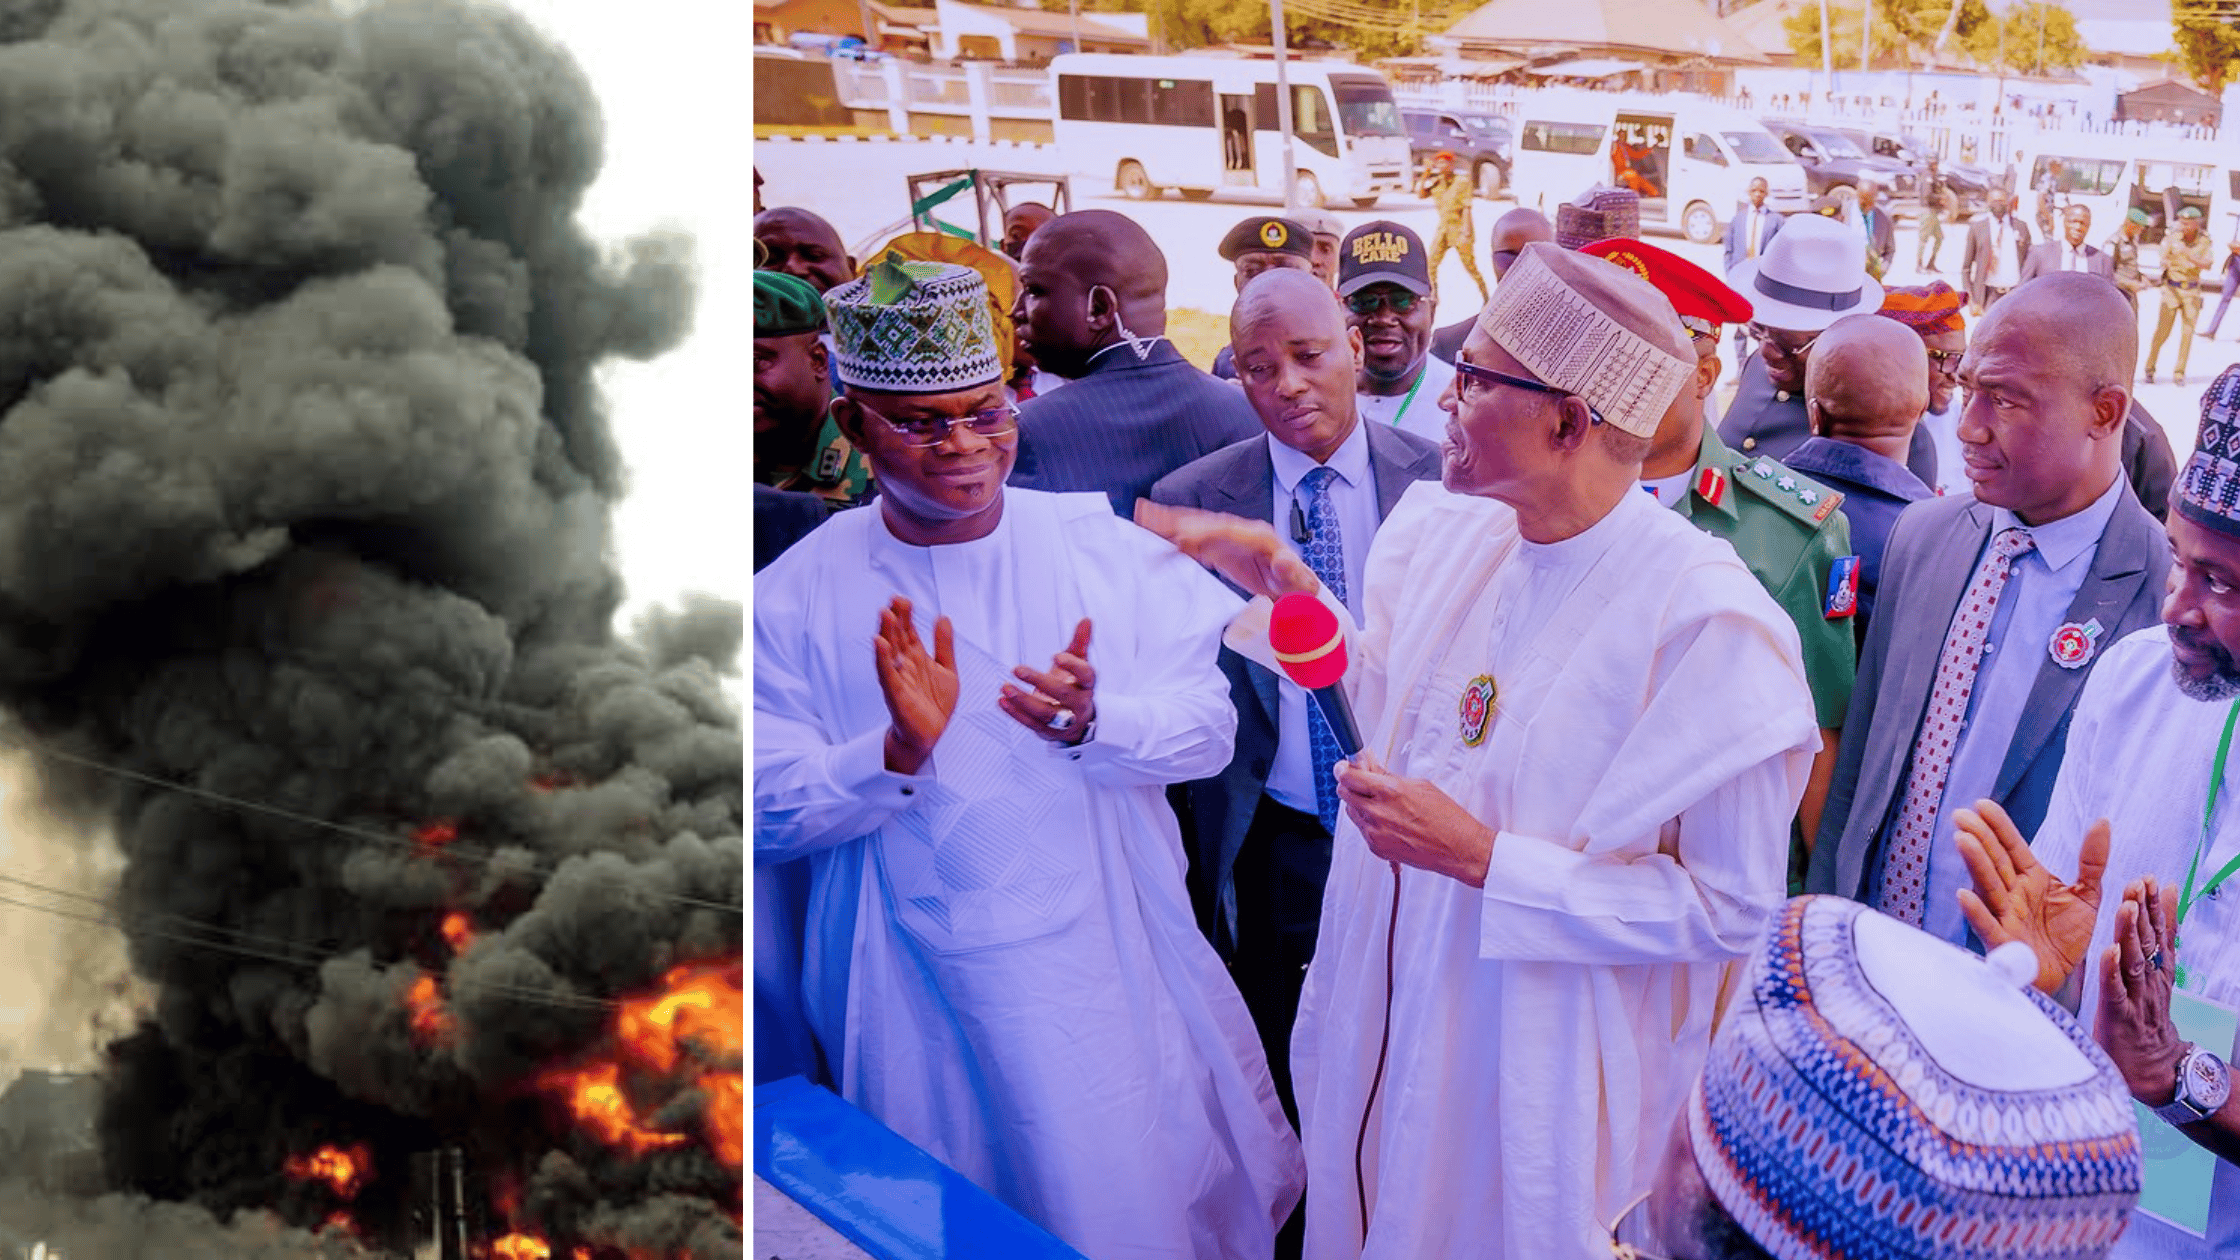 Kogi Explosion Was Targeted At Buhari - ISWAP Terrorists Claim Responsibility For Attack